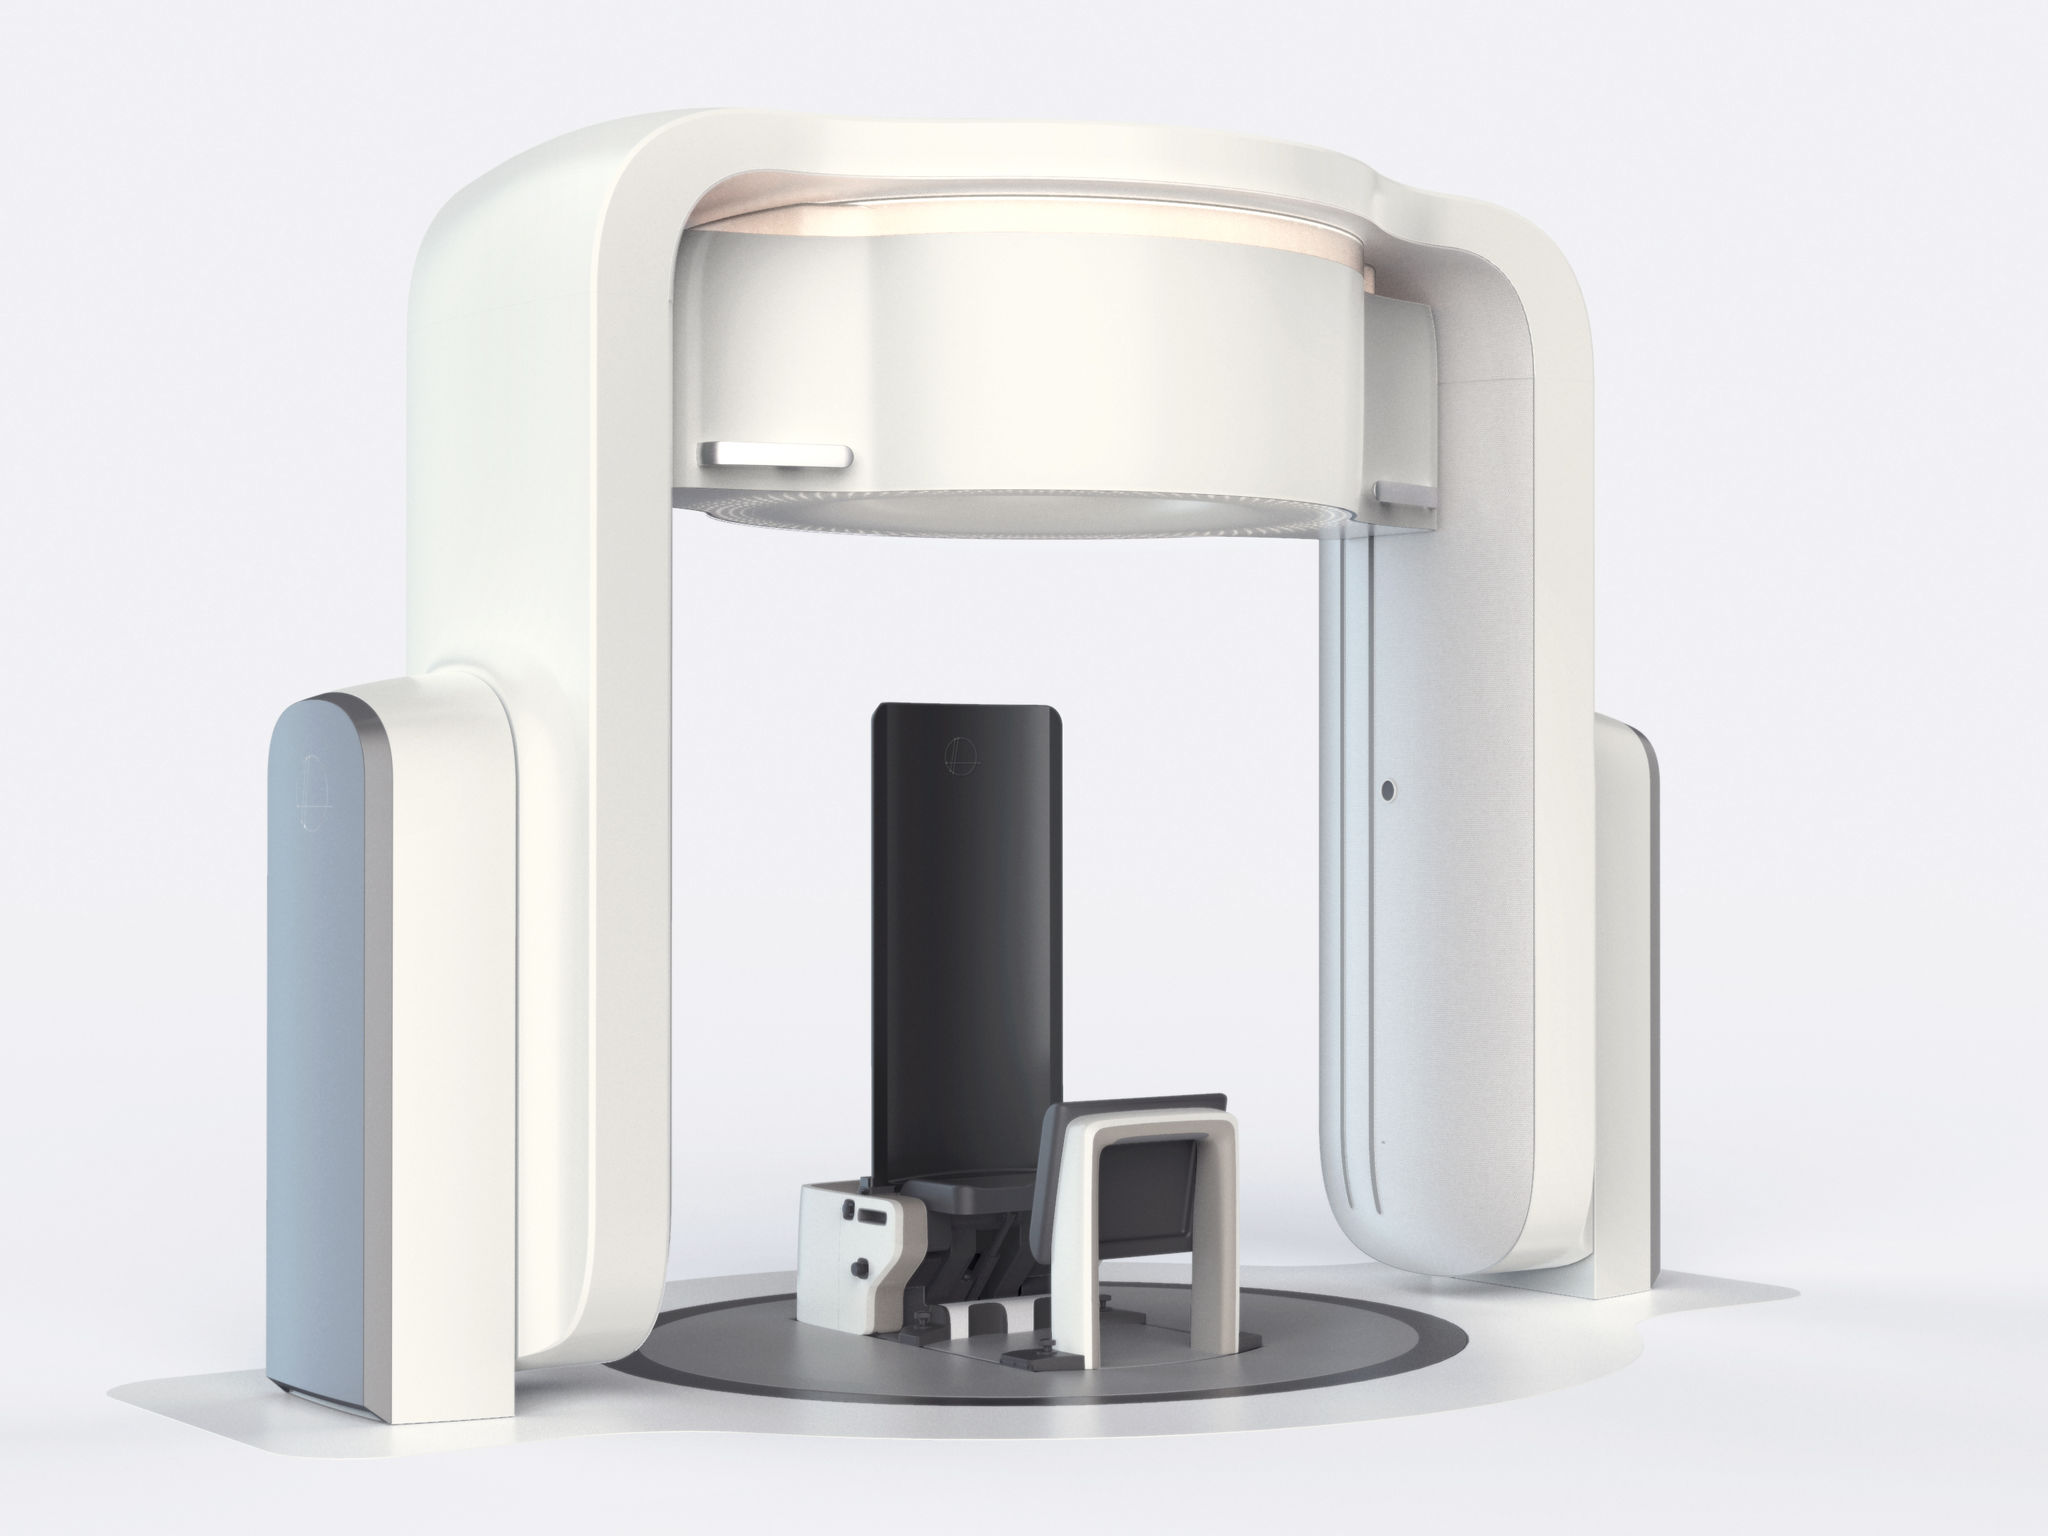 Leo Cancer Care Radiation Therapy System